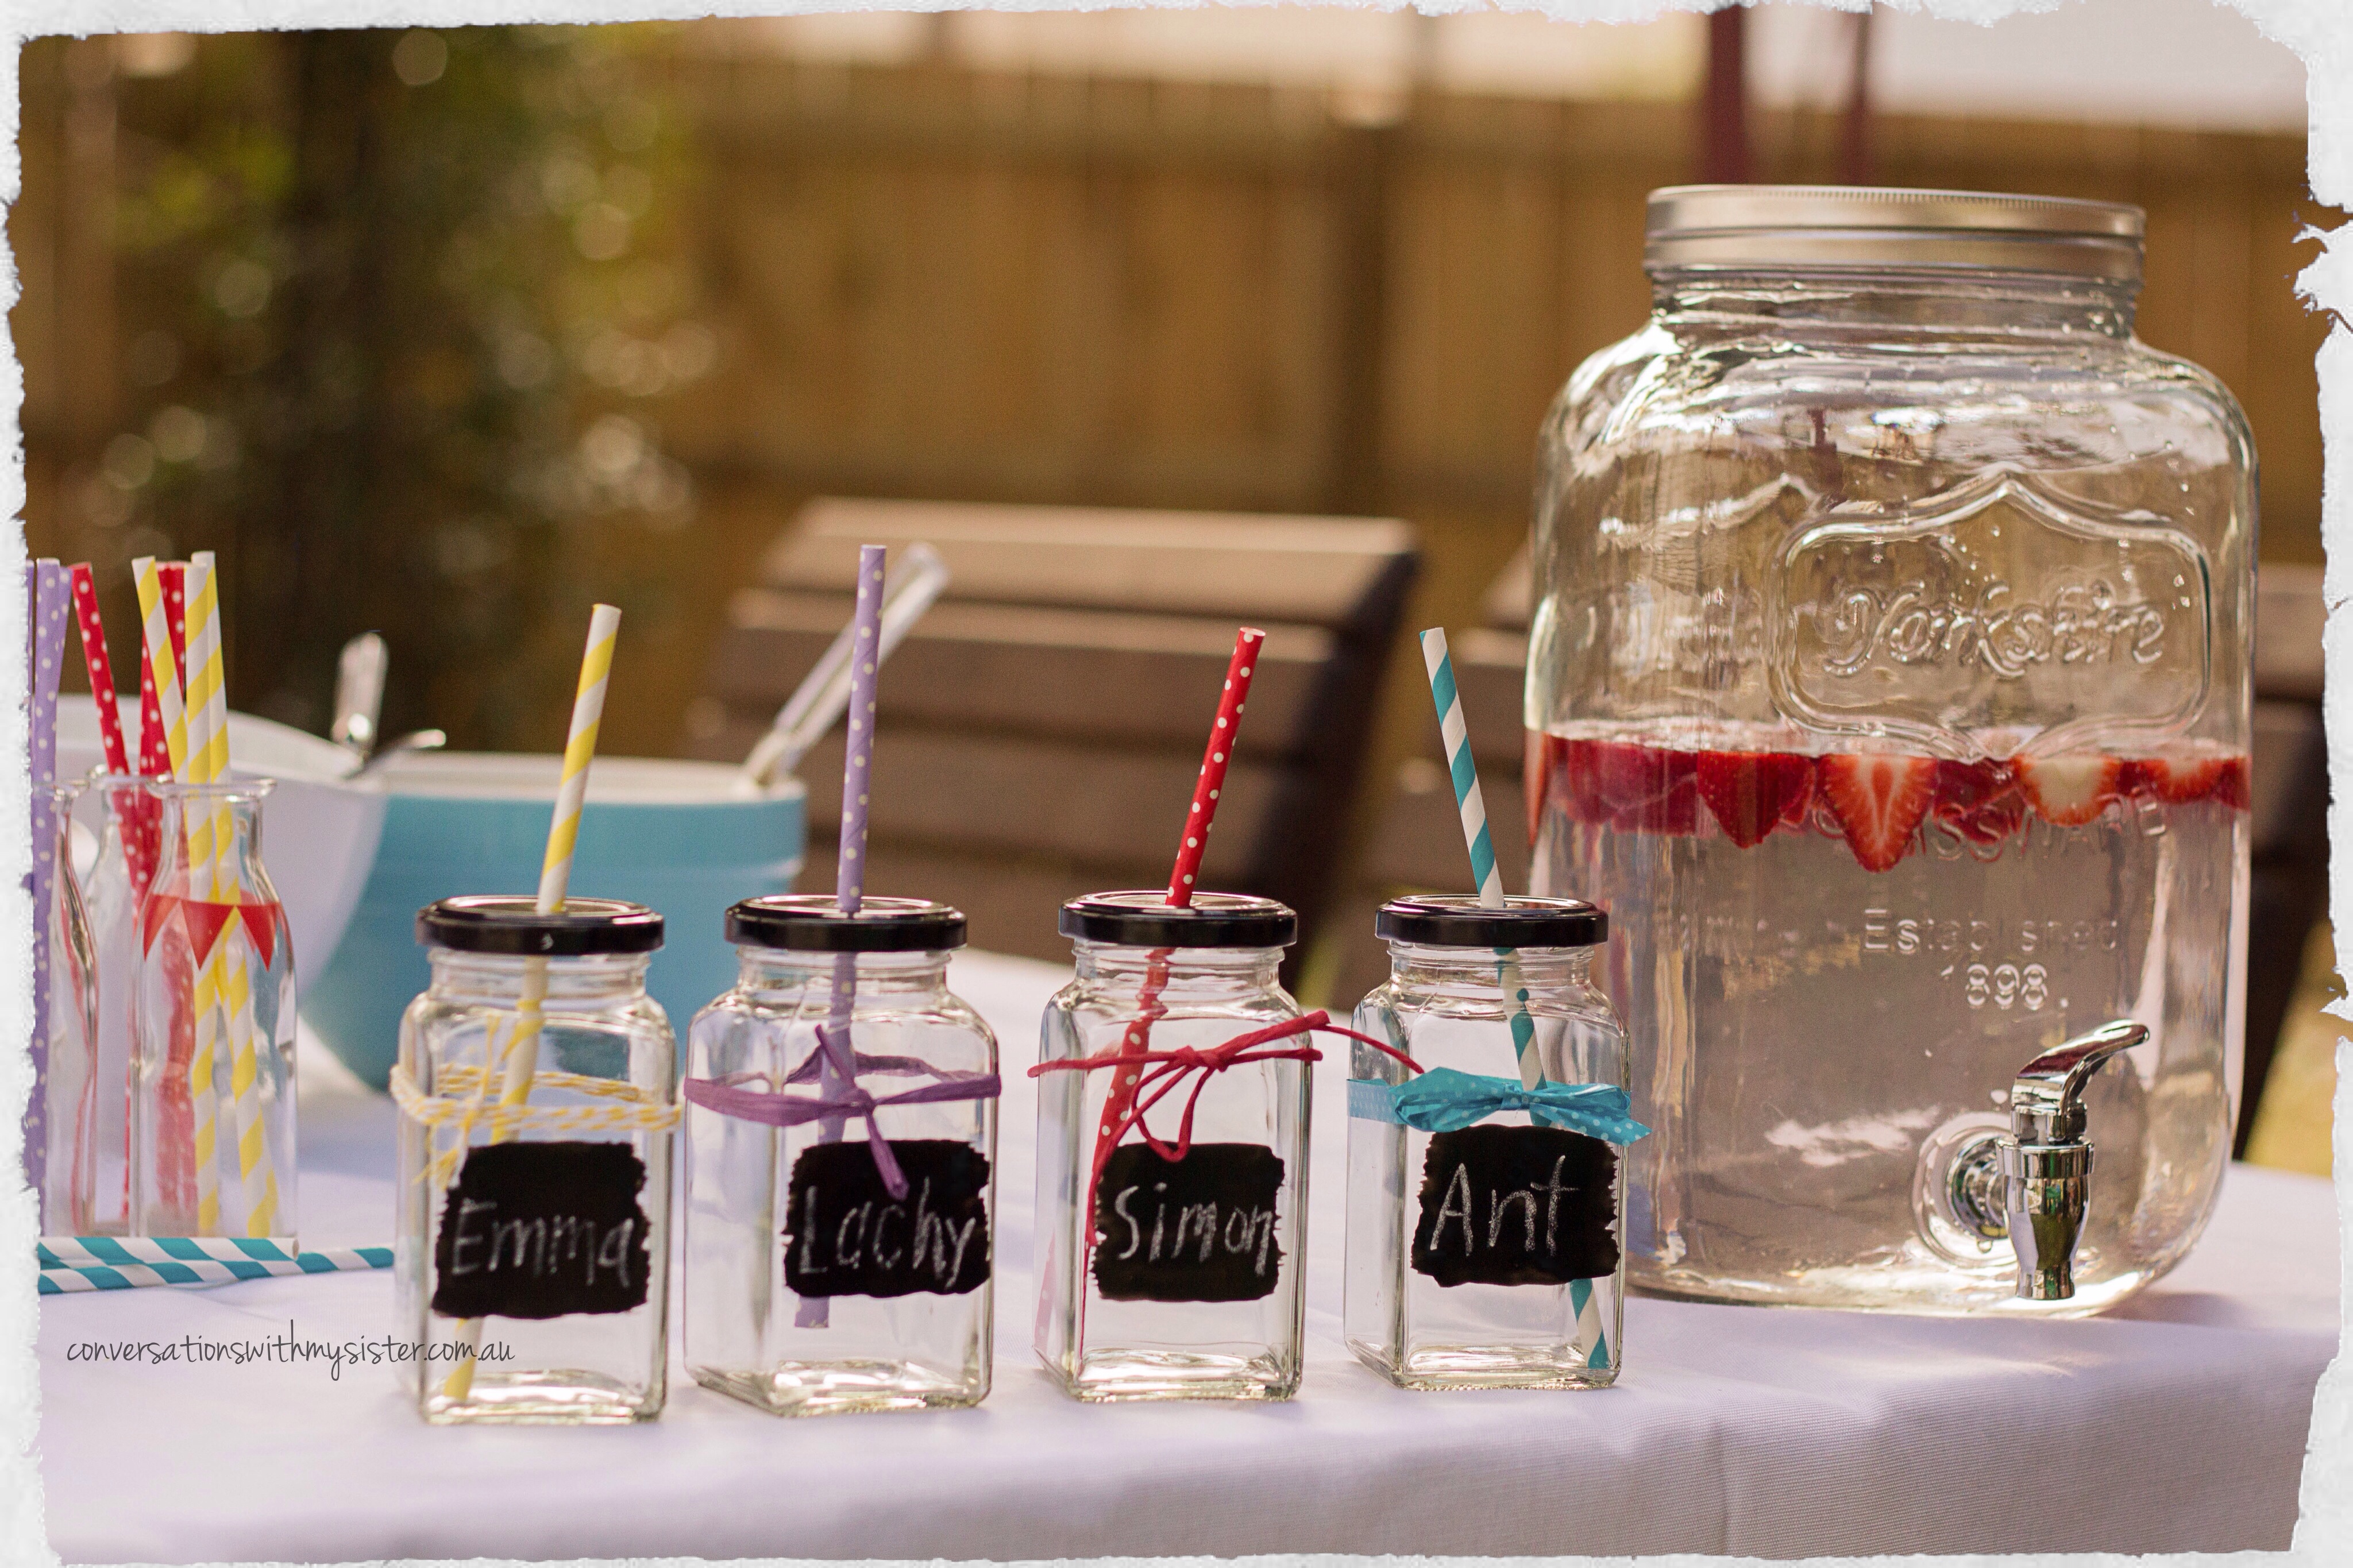 Are you ready to embrace this newly revived and environmentally friendly craze of drinking out of a jar? This repurposing #DIY idea is a fun, simple and sustainable way to jazz up any party or gathering. It will appeal to creative people who are always on the hunt for something a bit quirky and/or are consciously making an effort to reuse single-use items and minimise their contribution to landfill.